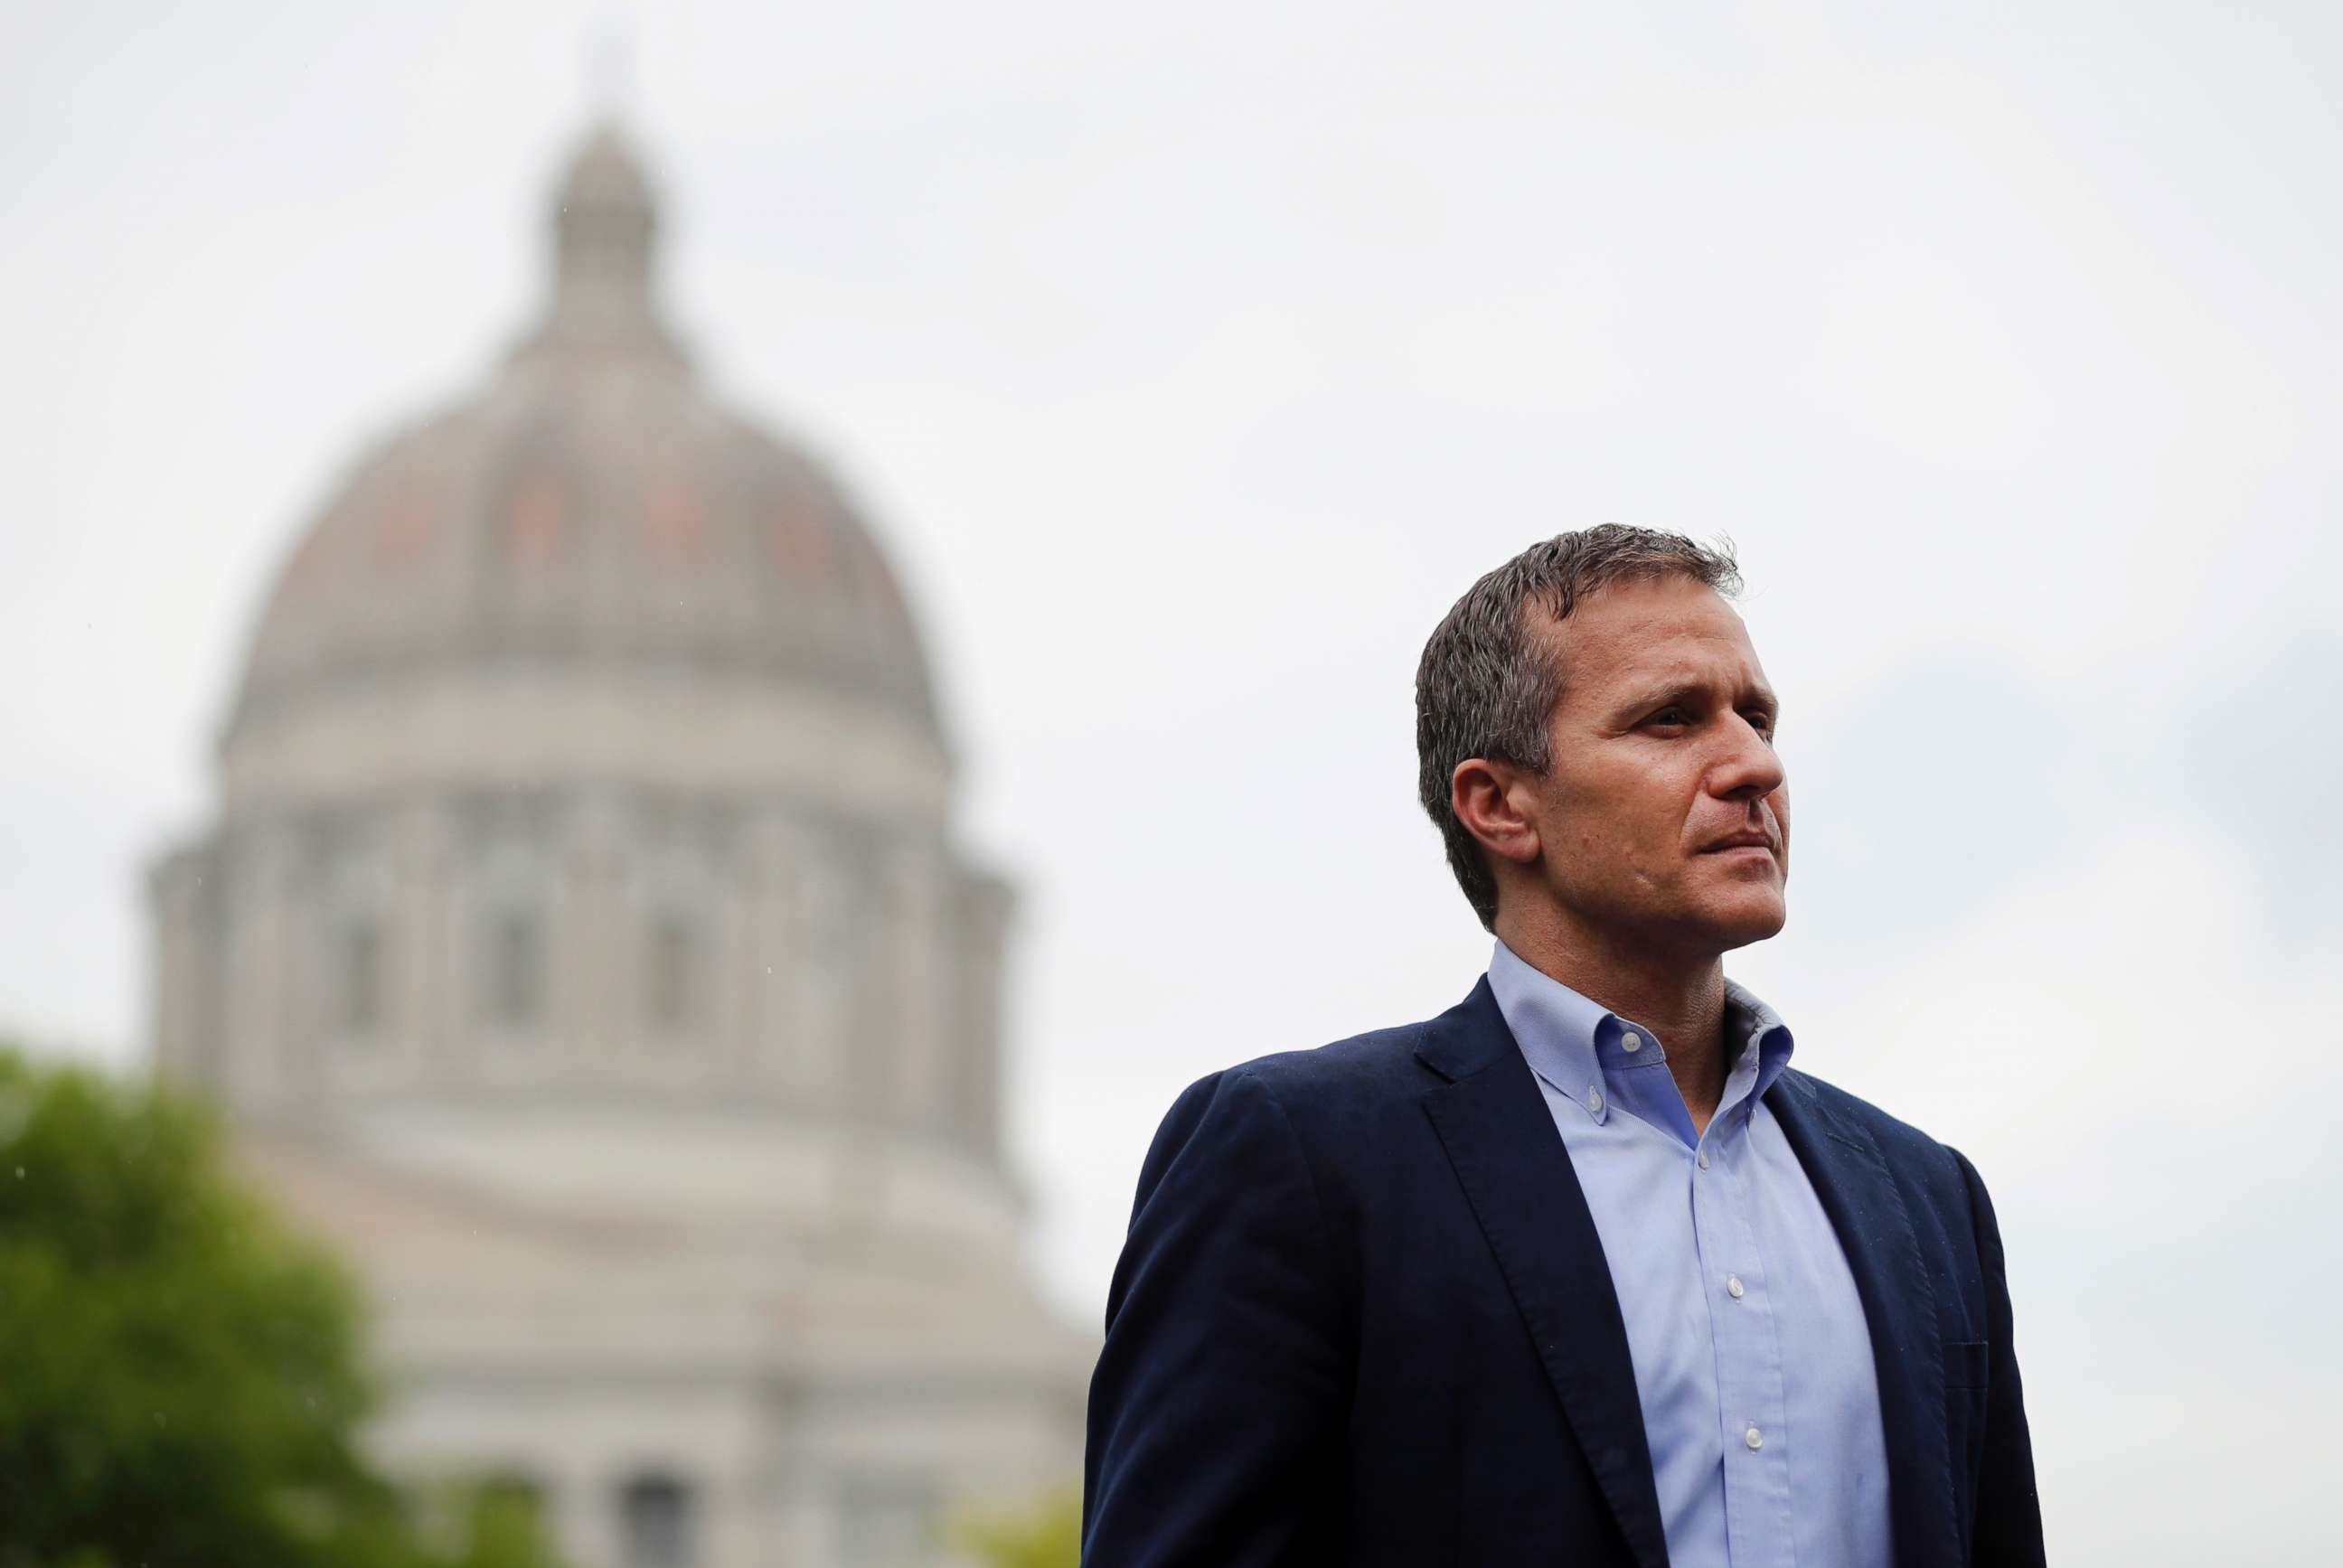 PHOTO: Missouri Gov. Eric Greitens stands off to the side before stepping up to the podium to deliver remarks to a small group of supporters near the capitol in Jefferson City, Mo., May 17, 2018, photo.